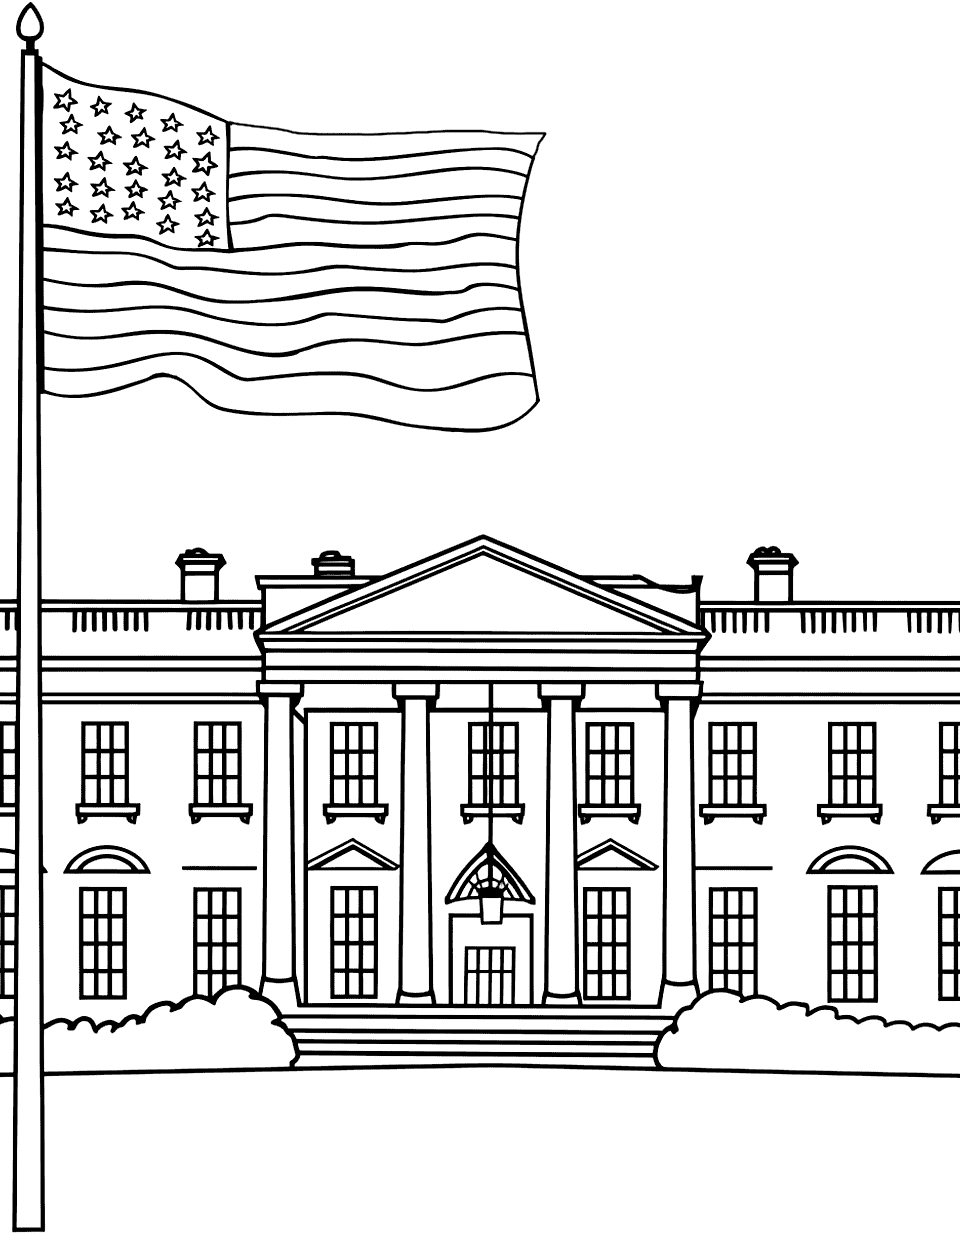 White House with Flag American Coloring Page - The White House with a large American flag flying in frontyard.